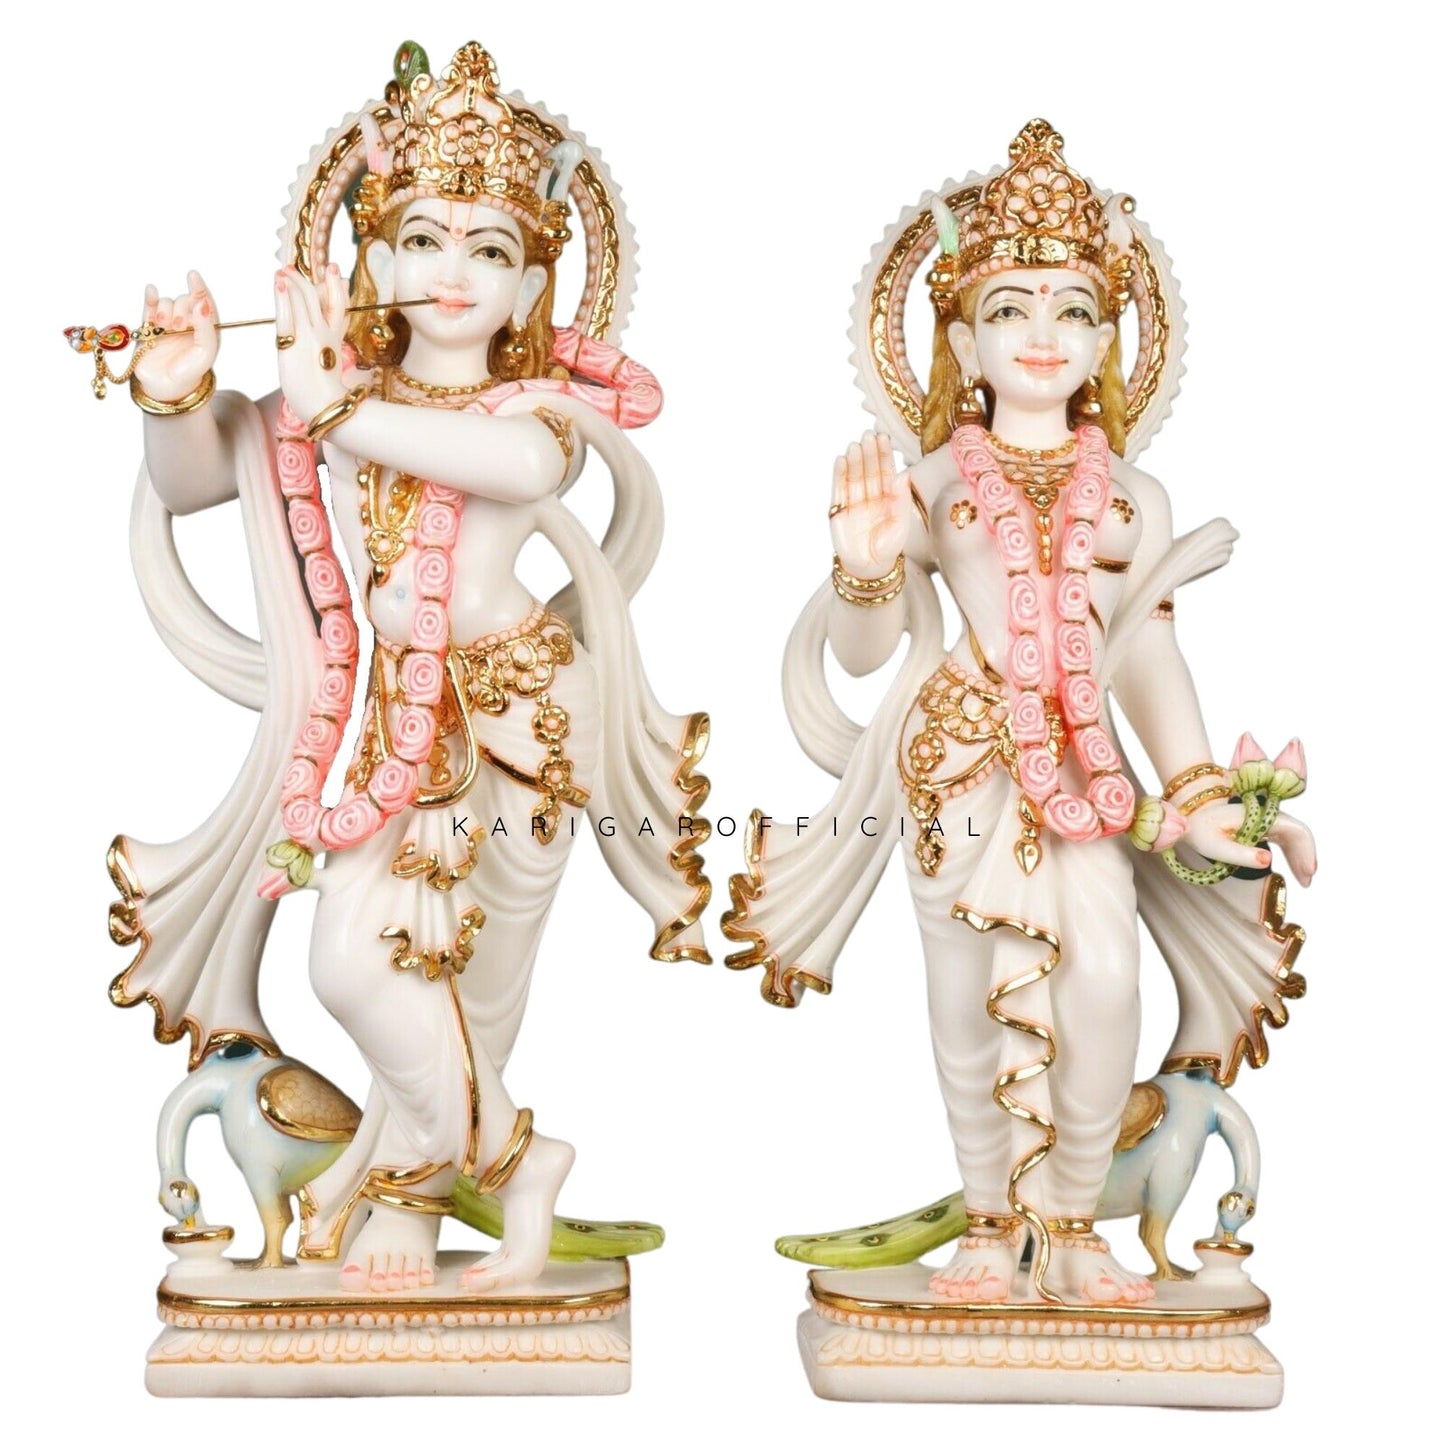 Radha Krishna Statue Standing With Peacock, Large 24 inches Murti in Royal Gold Leaf Work, White Golden Pink Accents Marble RadhaKrishna idol, Hindu Divine Couple Home Temple Wedding Housewarming Gift